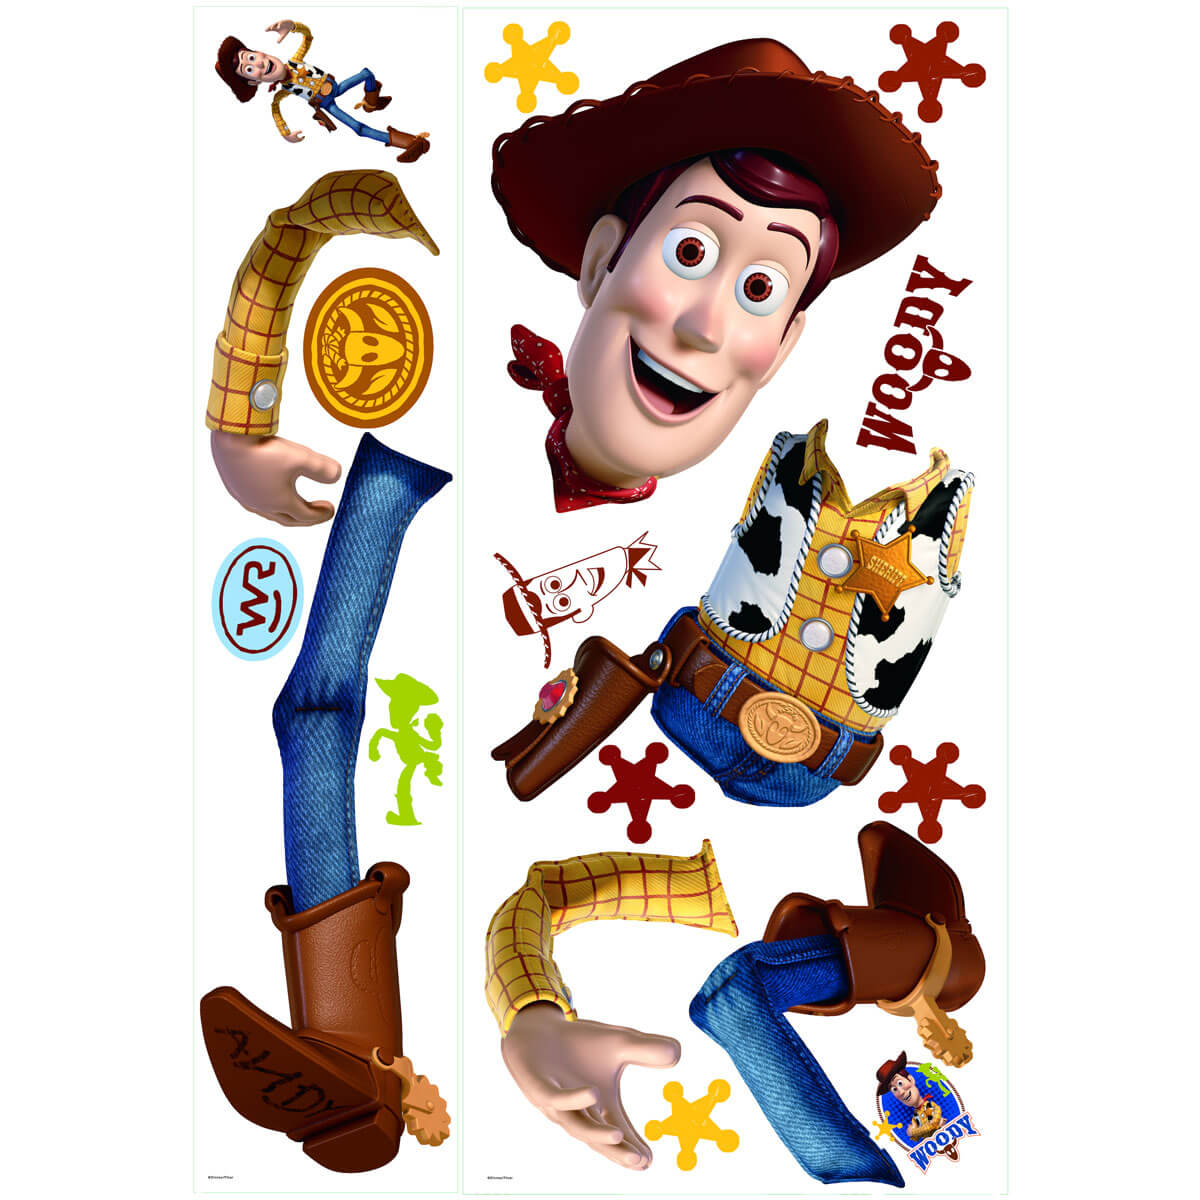 Pixar Toy Story 4 Woody Peel & Stick Wall Decal